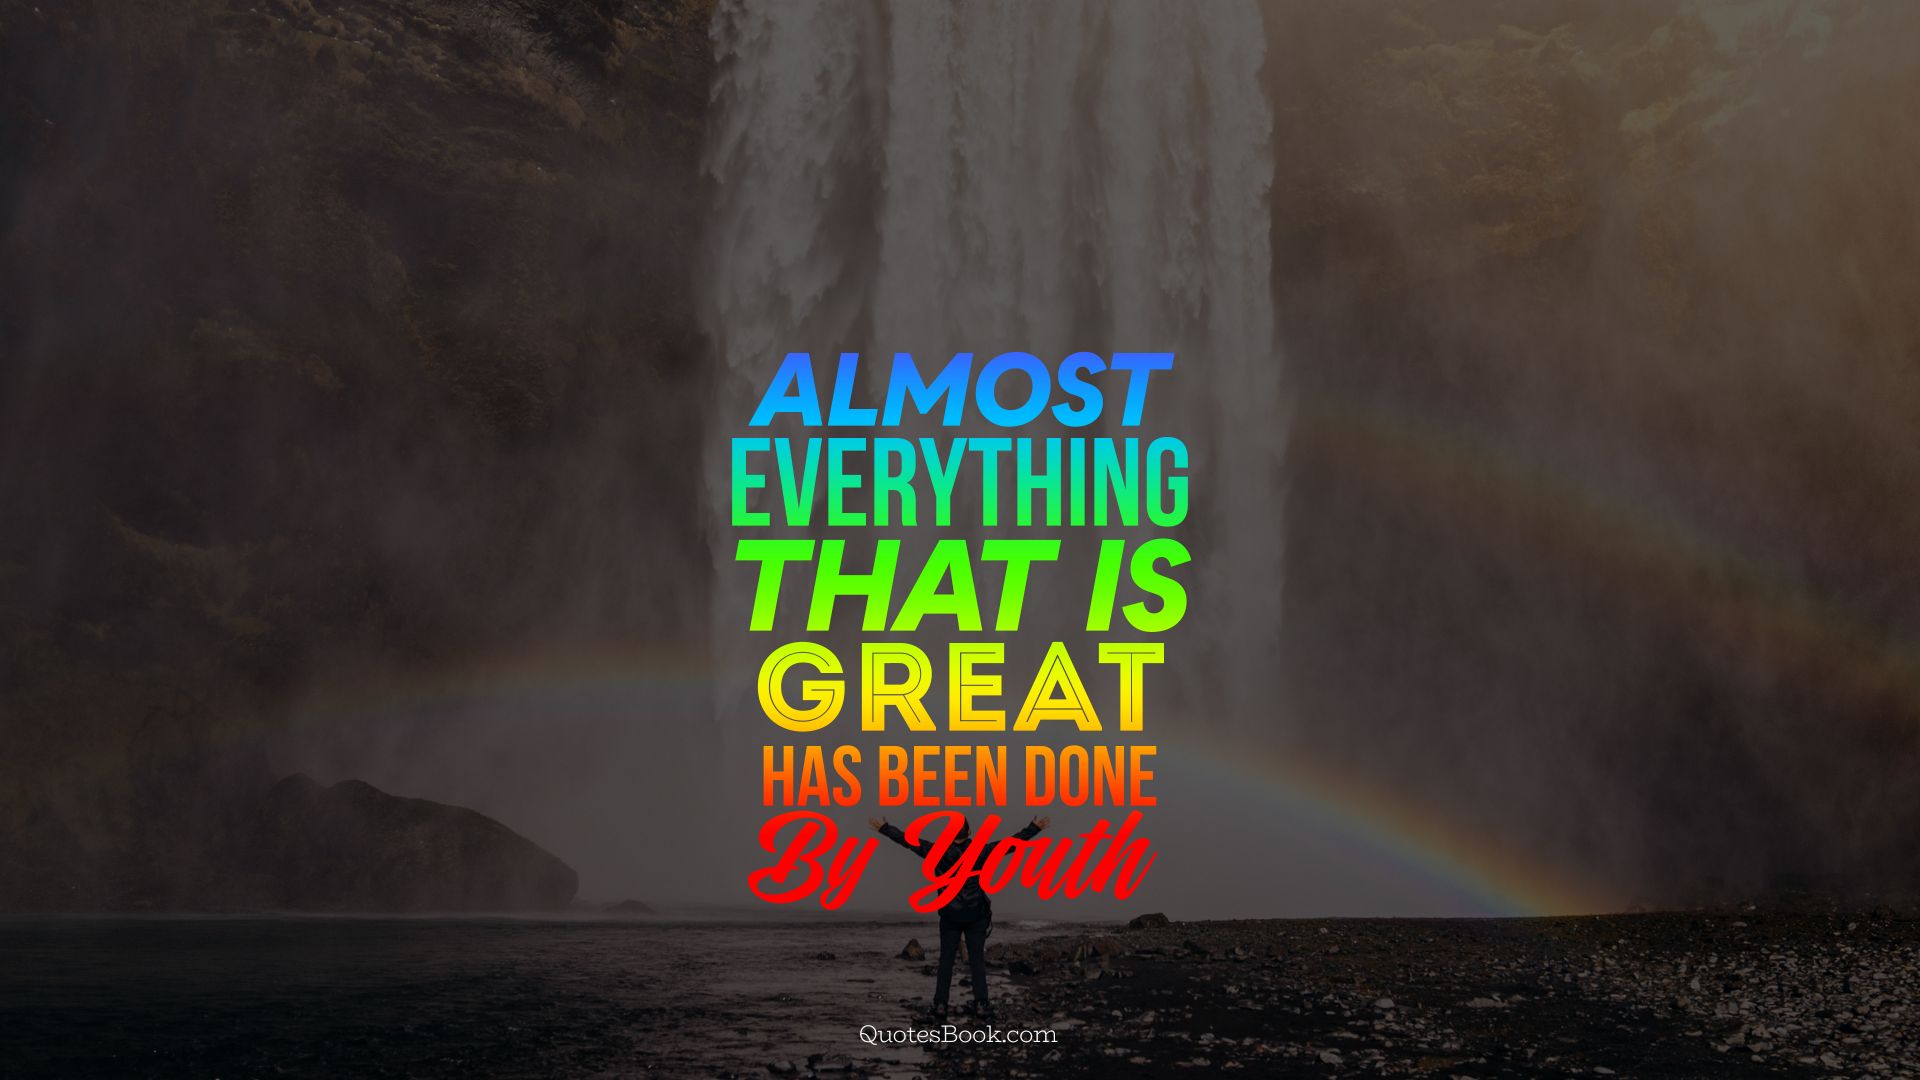 Almost everything that is great has been done by youth